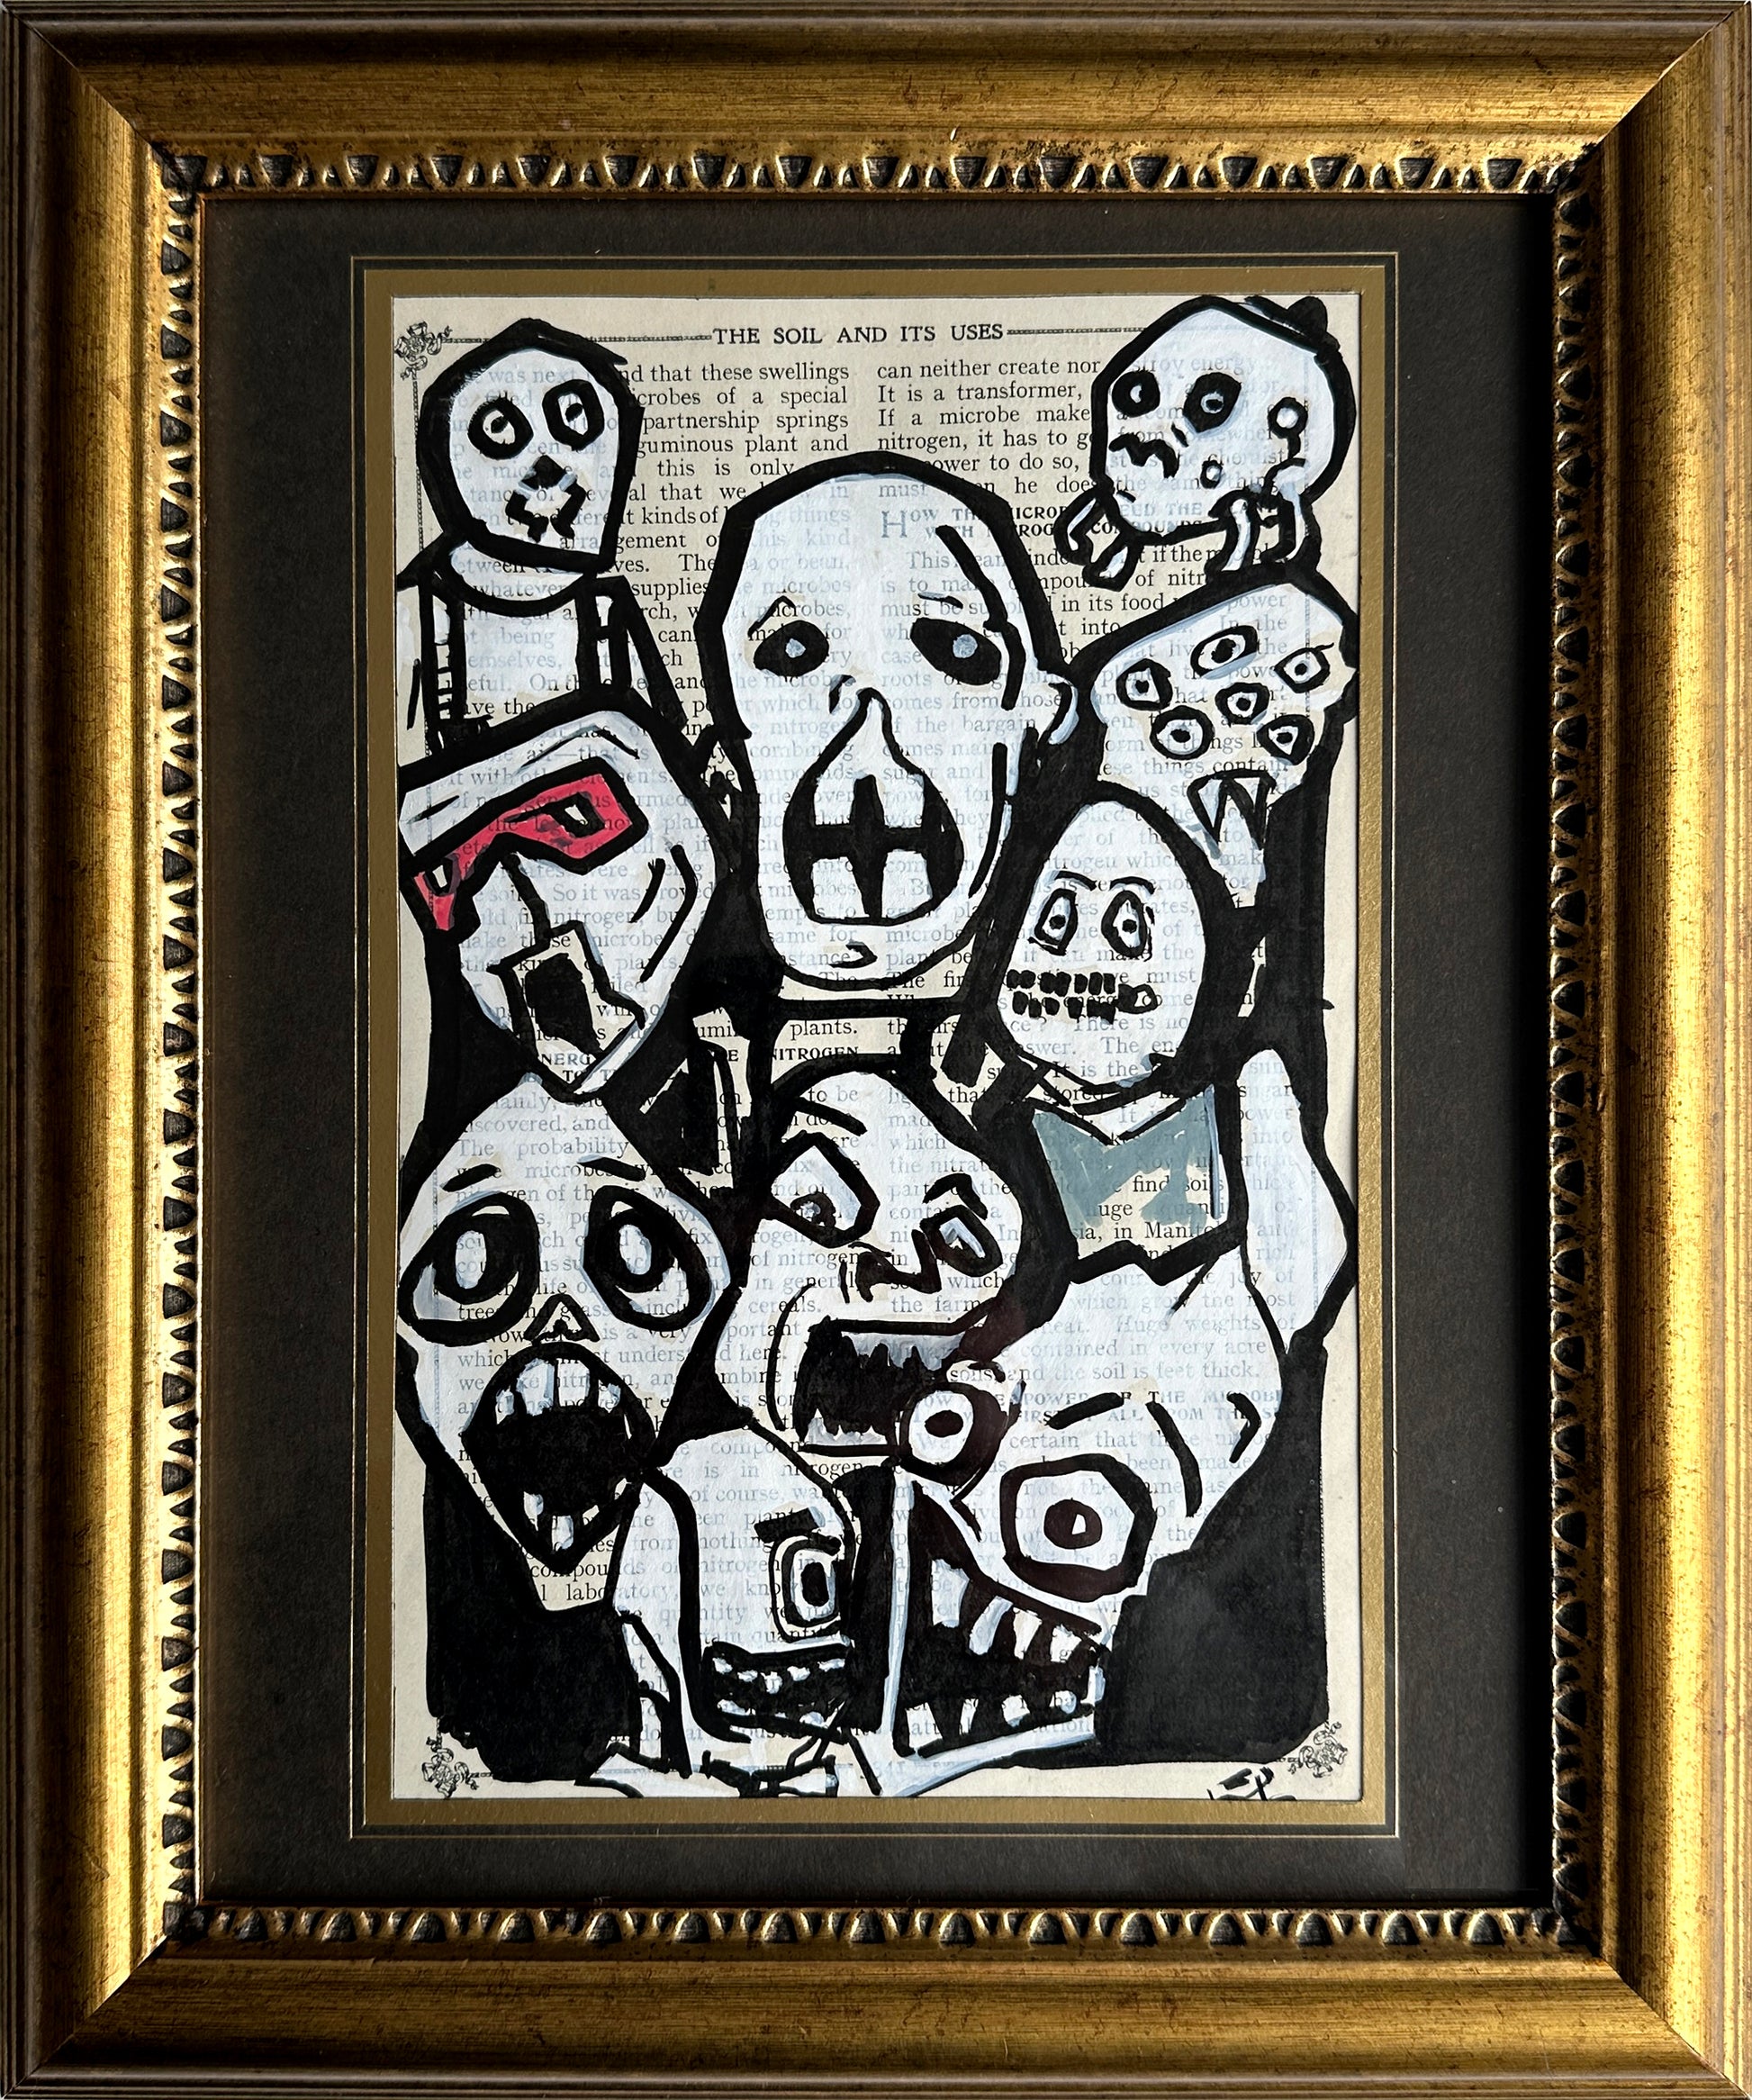 Vintage-inspired artwork featuring screaming characters